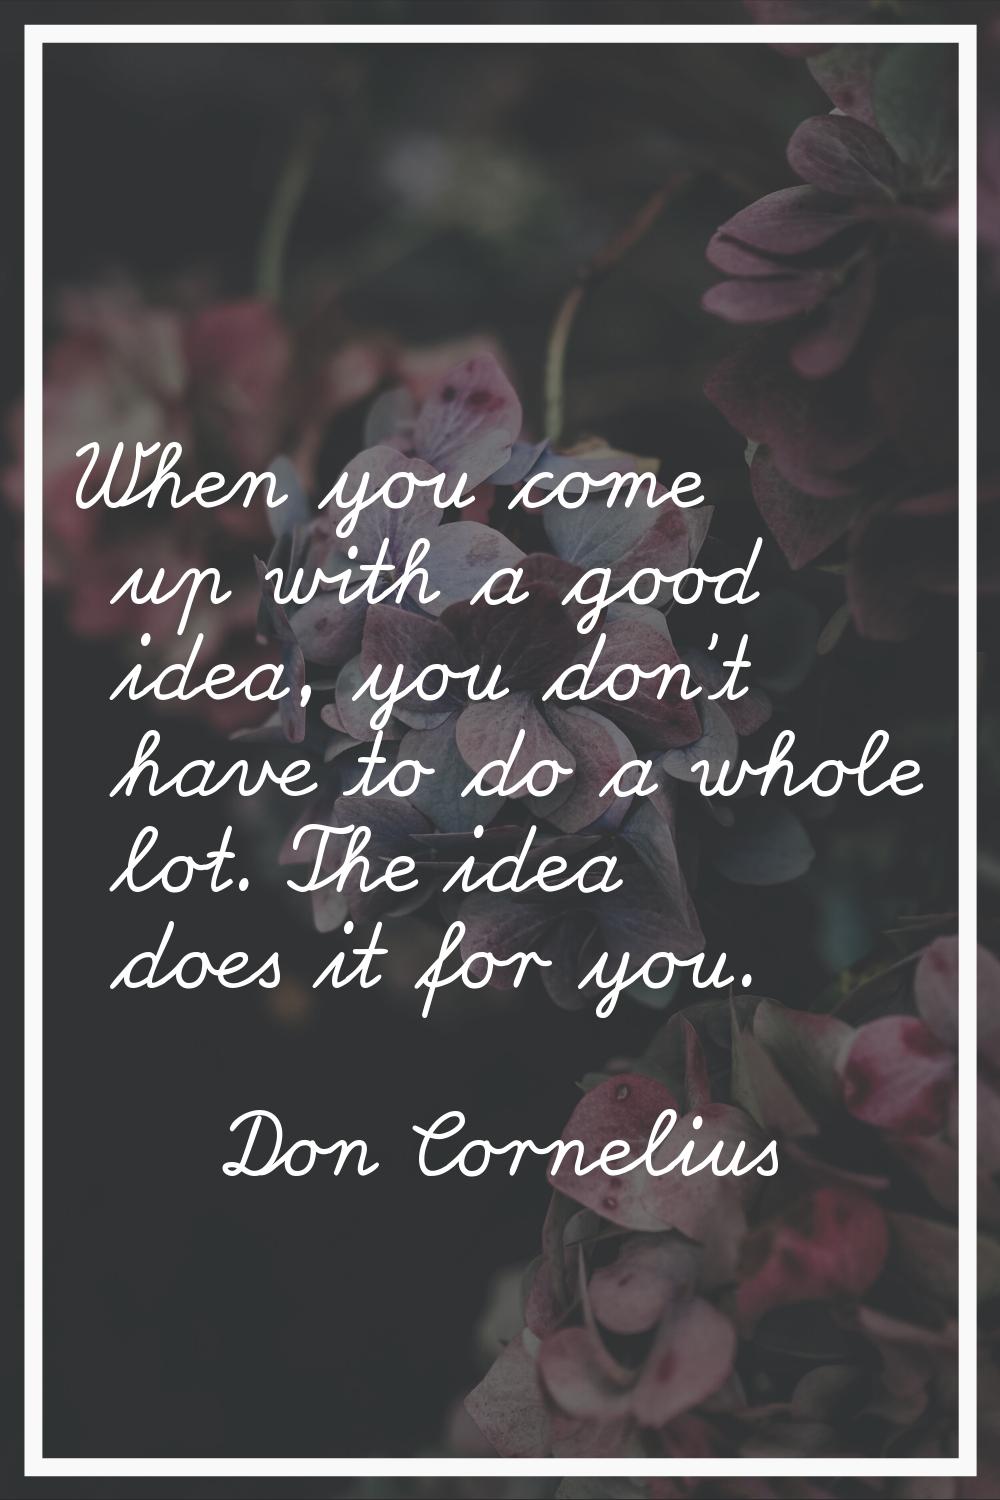 When you come up with a good idea, you don't have to do a whole lot. The idea does it for you.